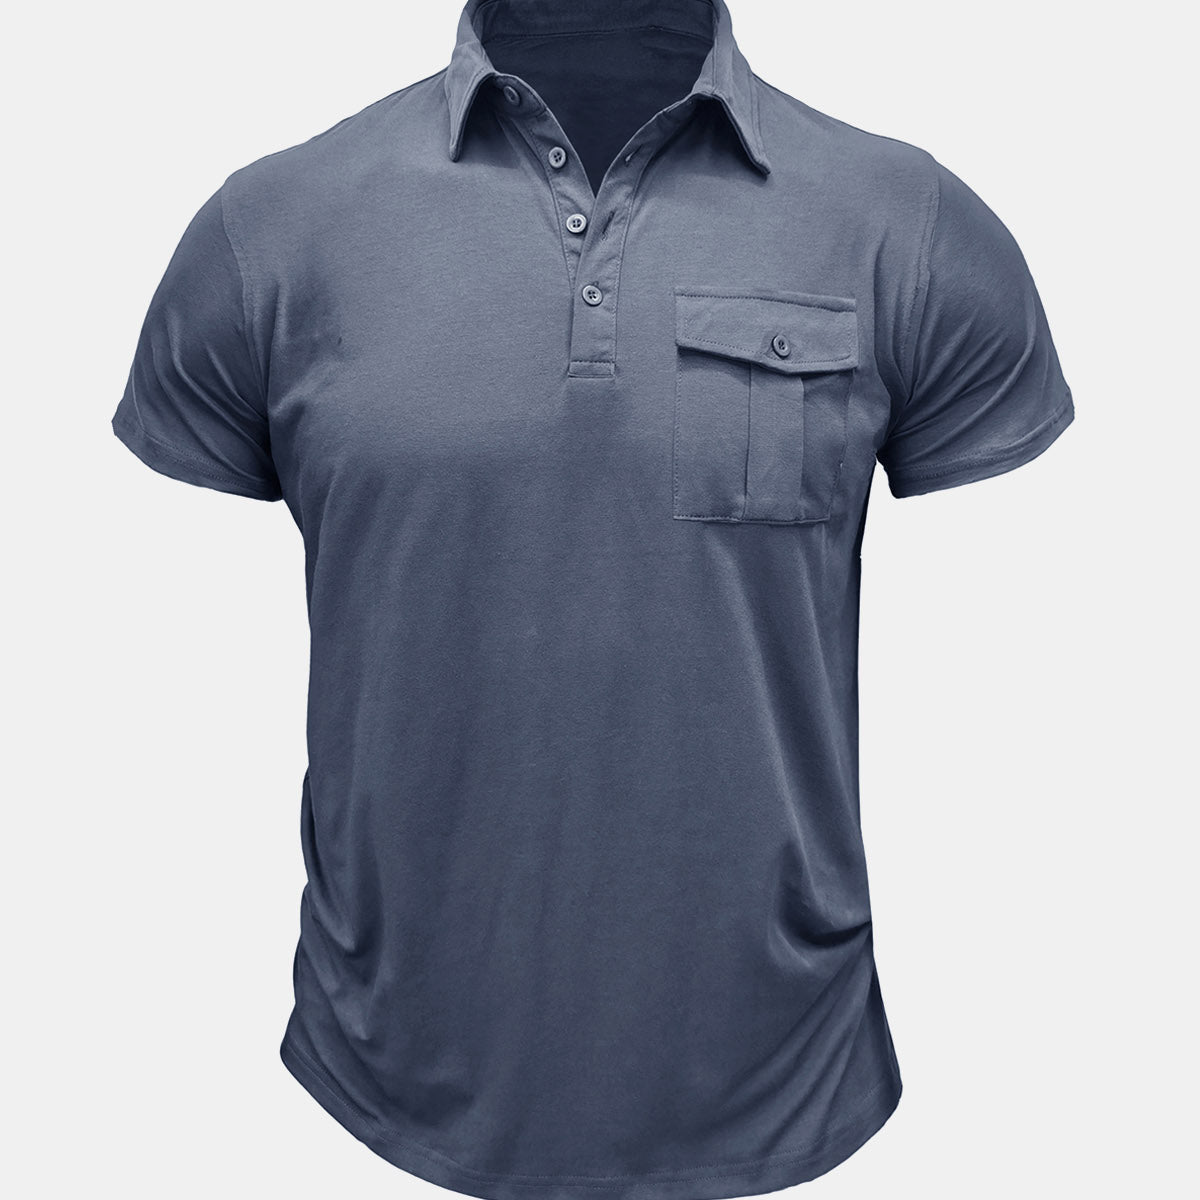 Men's Summer Casual Breathable Cotton Pocket Solid Color Short Sleeve Polo Shirt